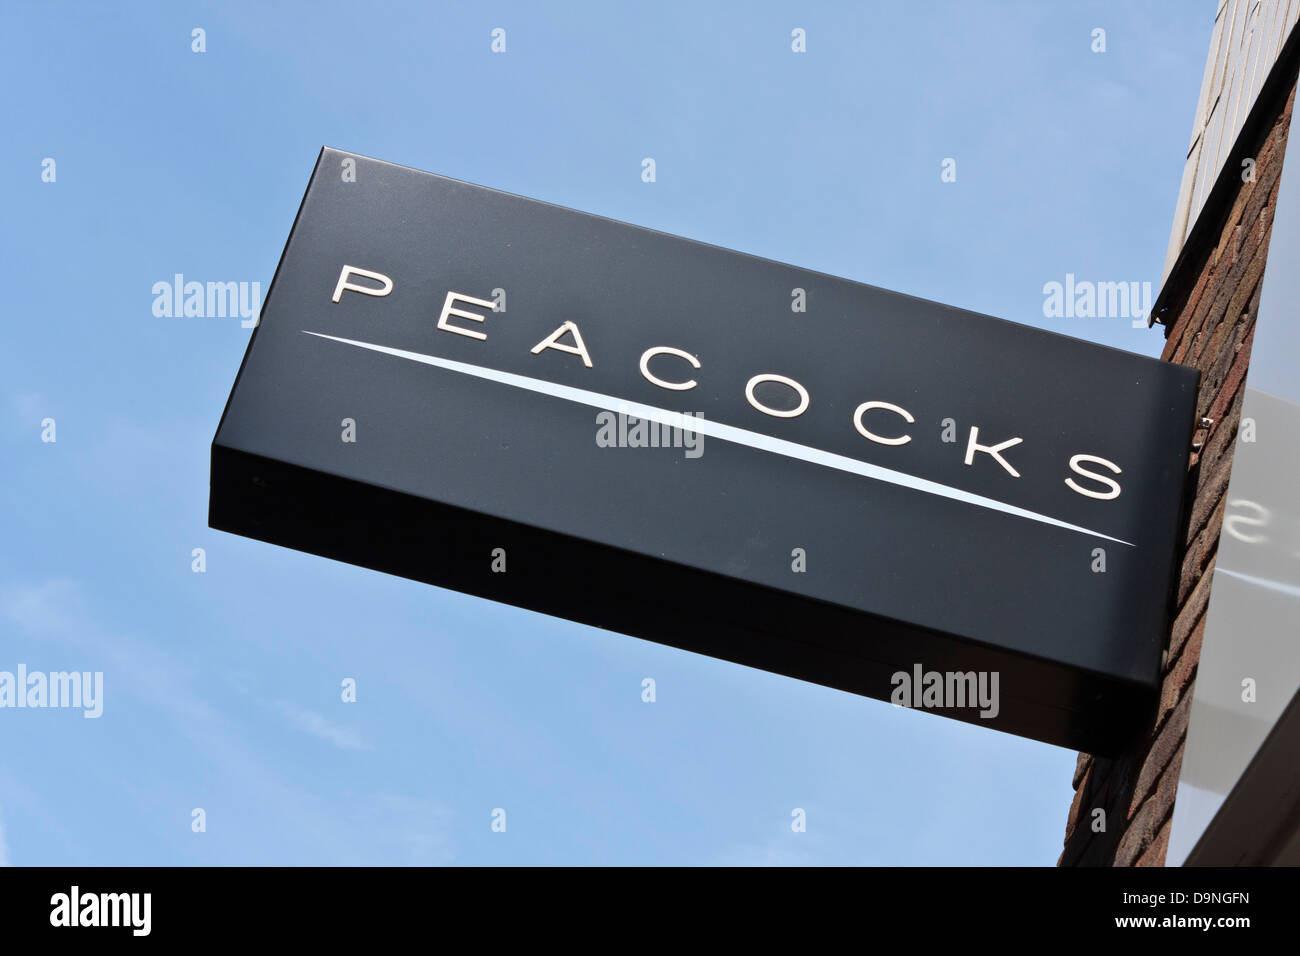 Peacocks, re-branded high street value fashion retailer in the UK. Stock Photo